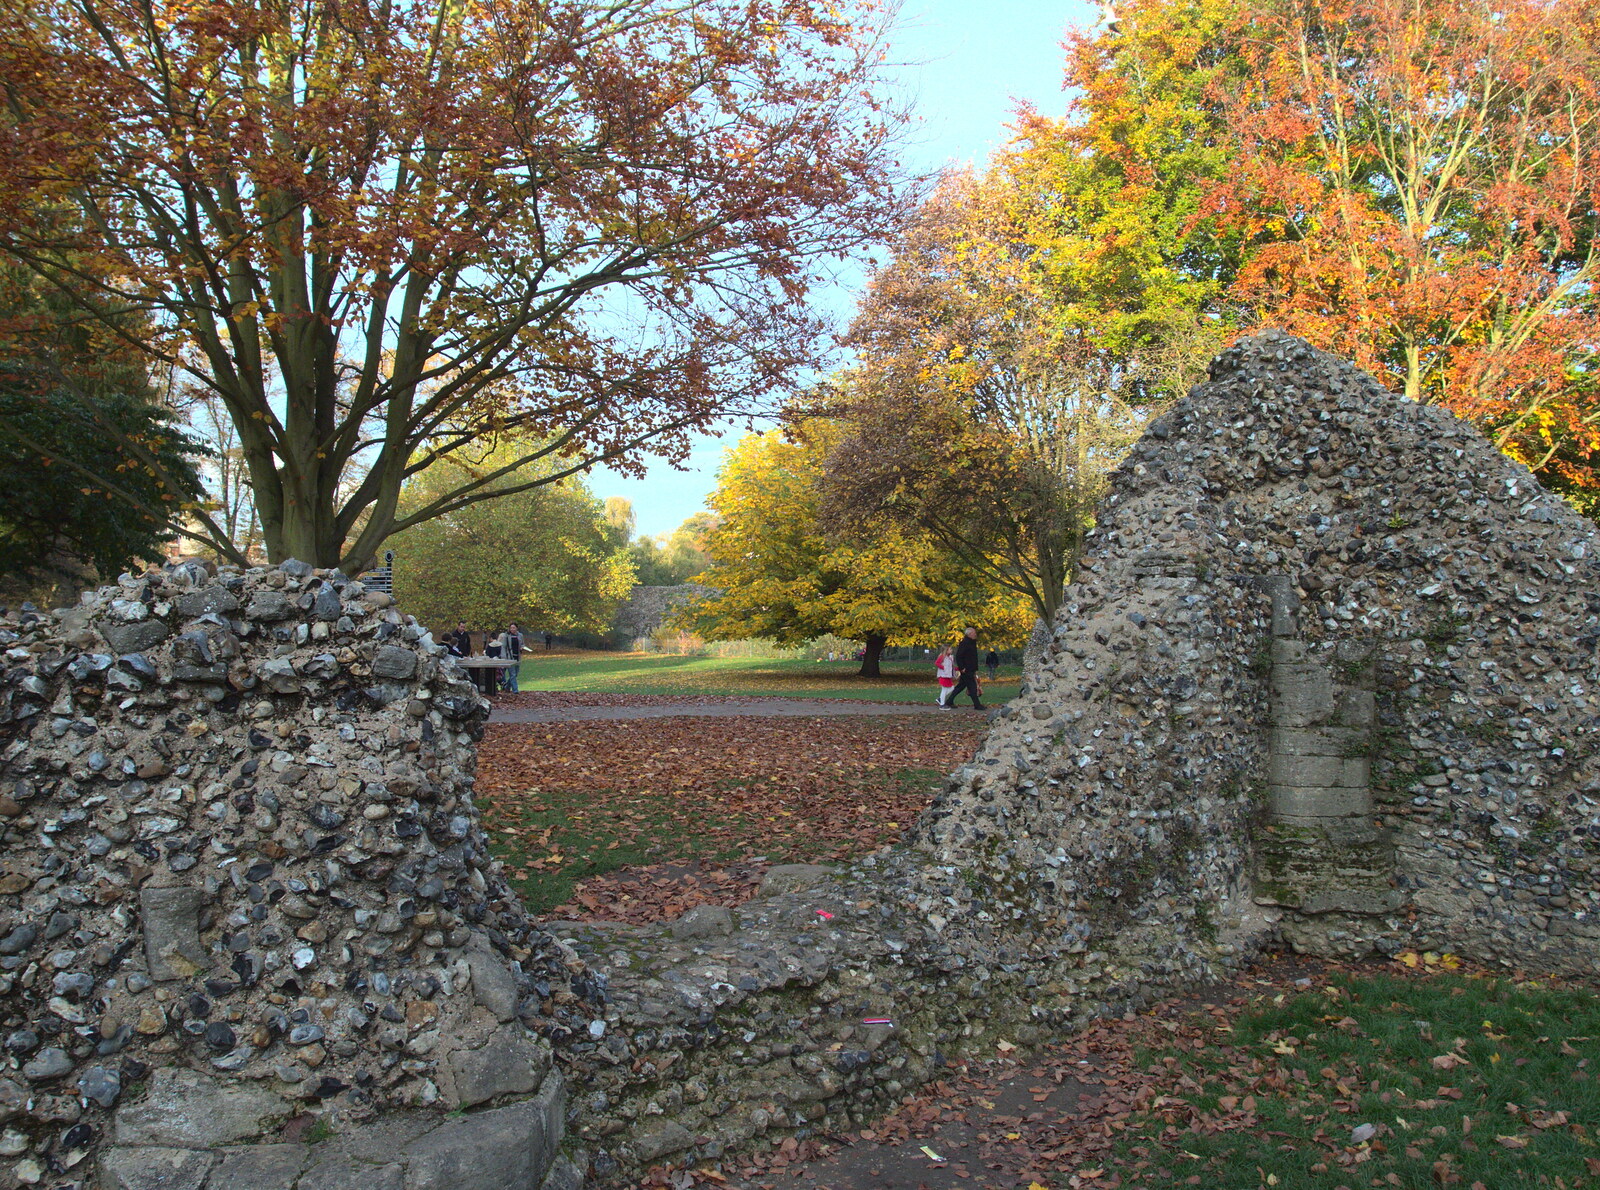 Ruins within autumn trees from Abbey Gardens in Autumn, Bury St. Edmunds, Suffolk - 27th October 2015